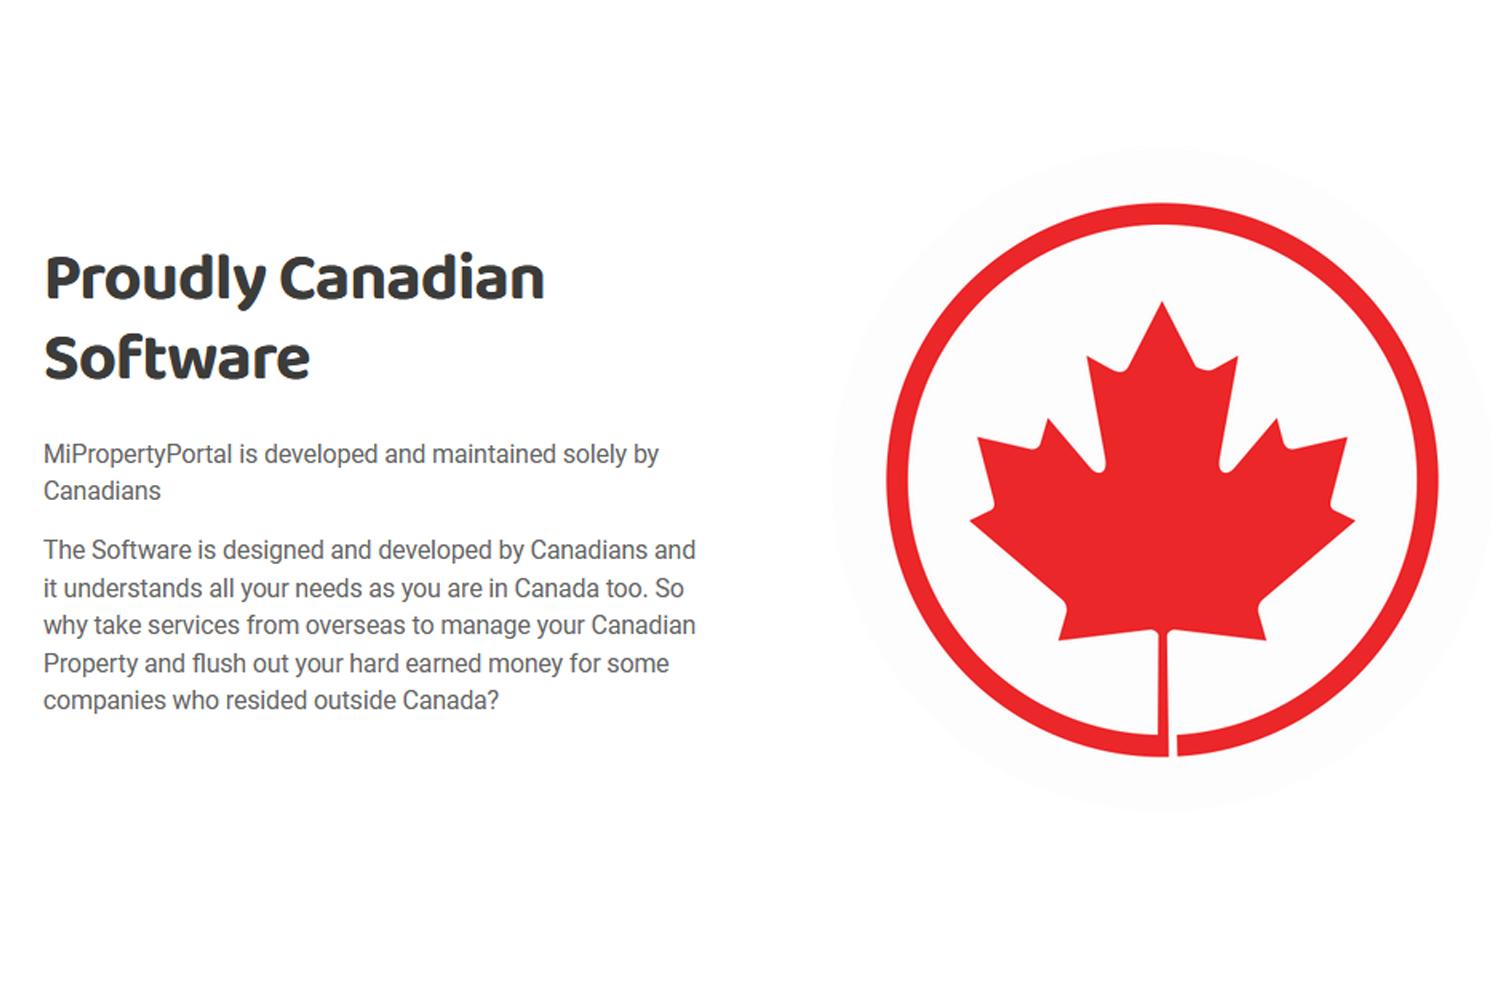 Proudly Canadian Software